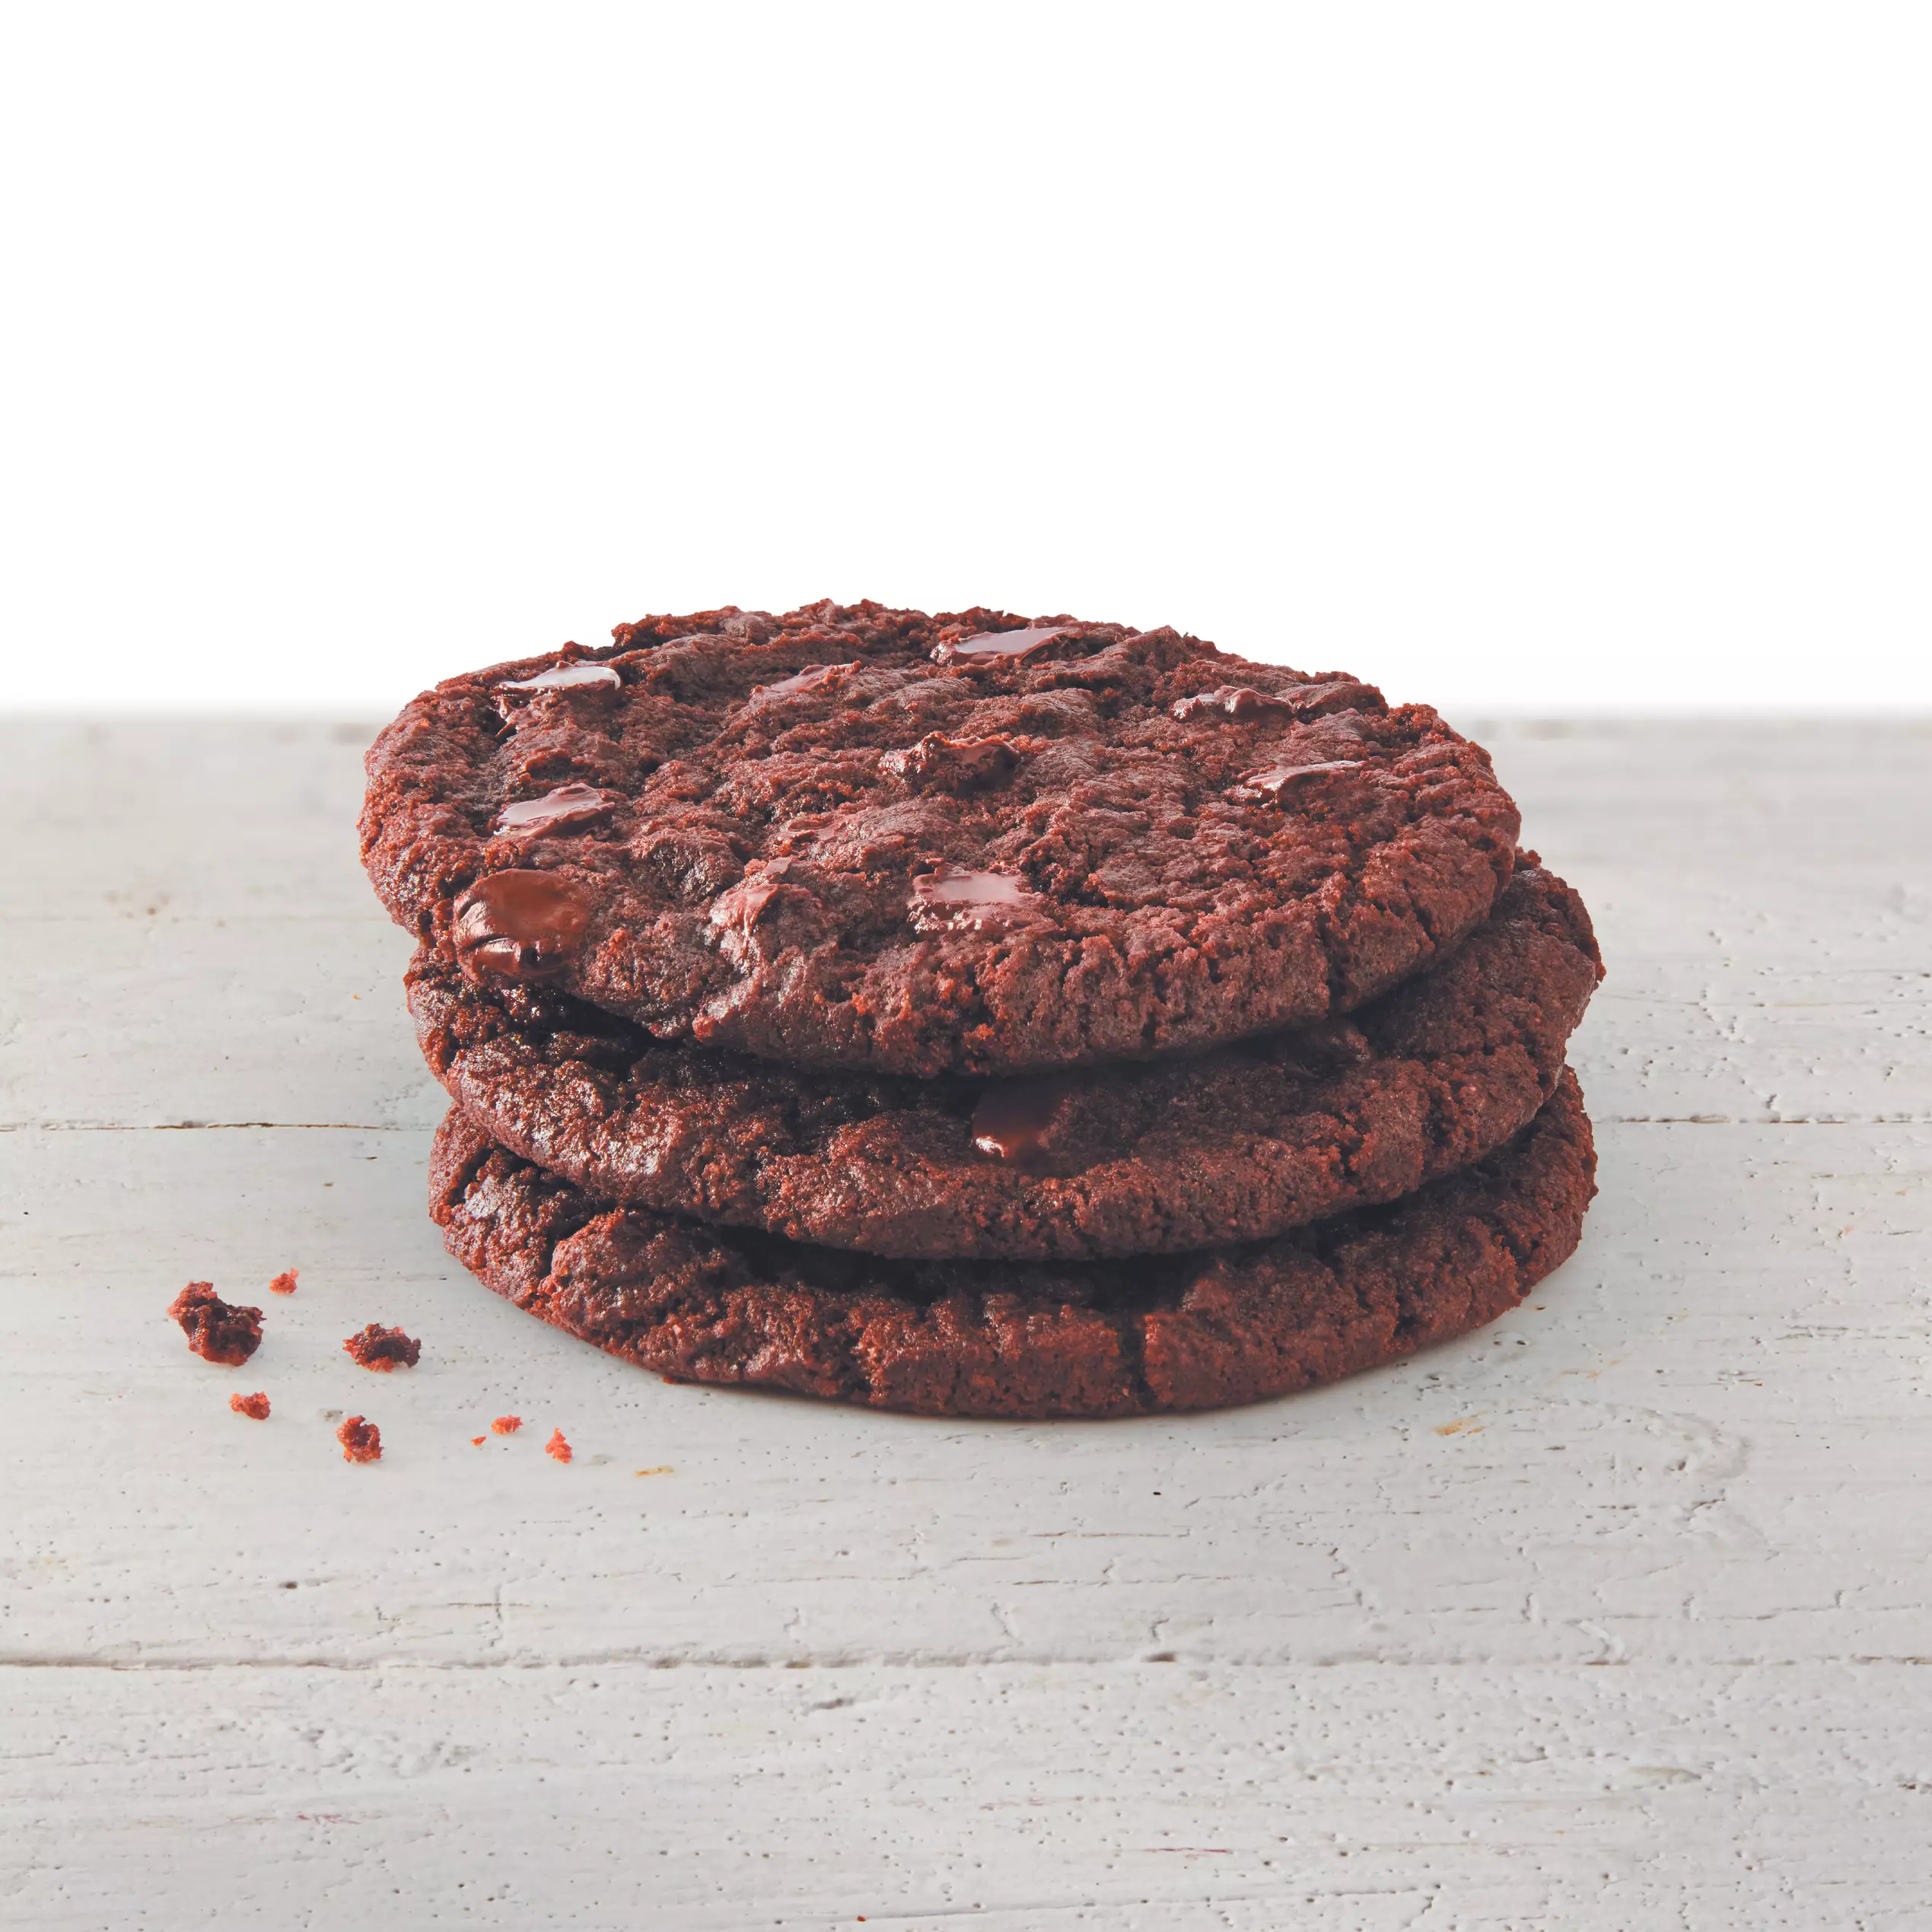 There's a vegan chocolate cookie too (